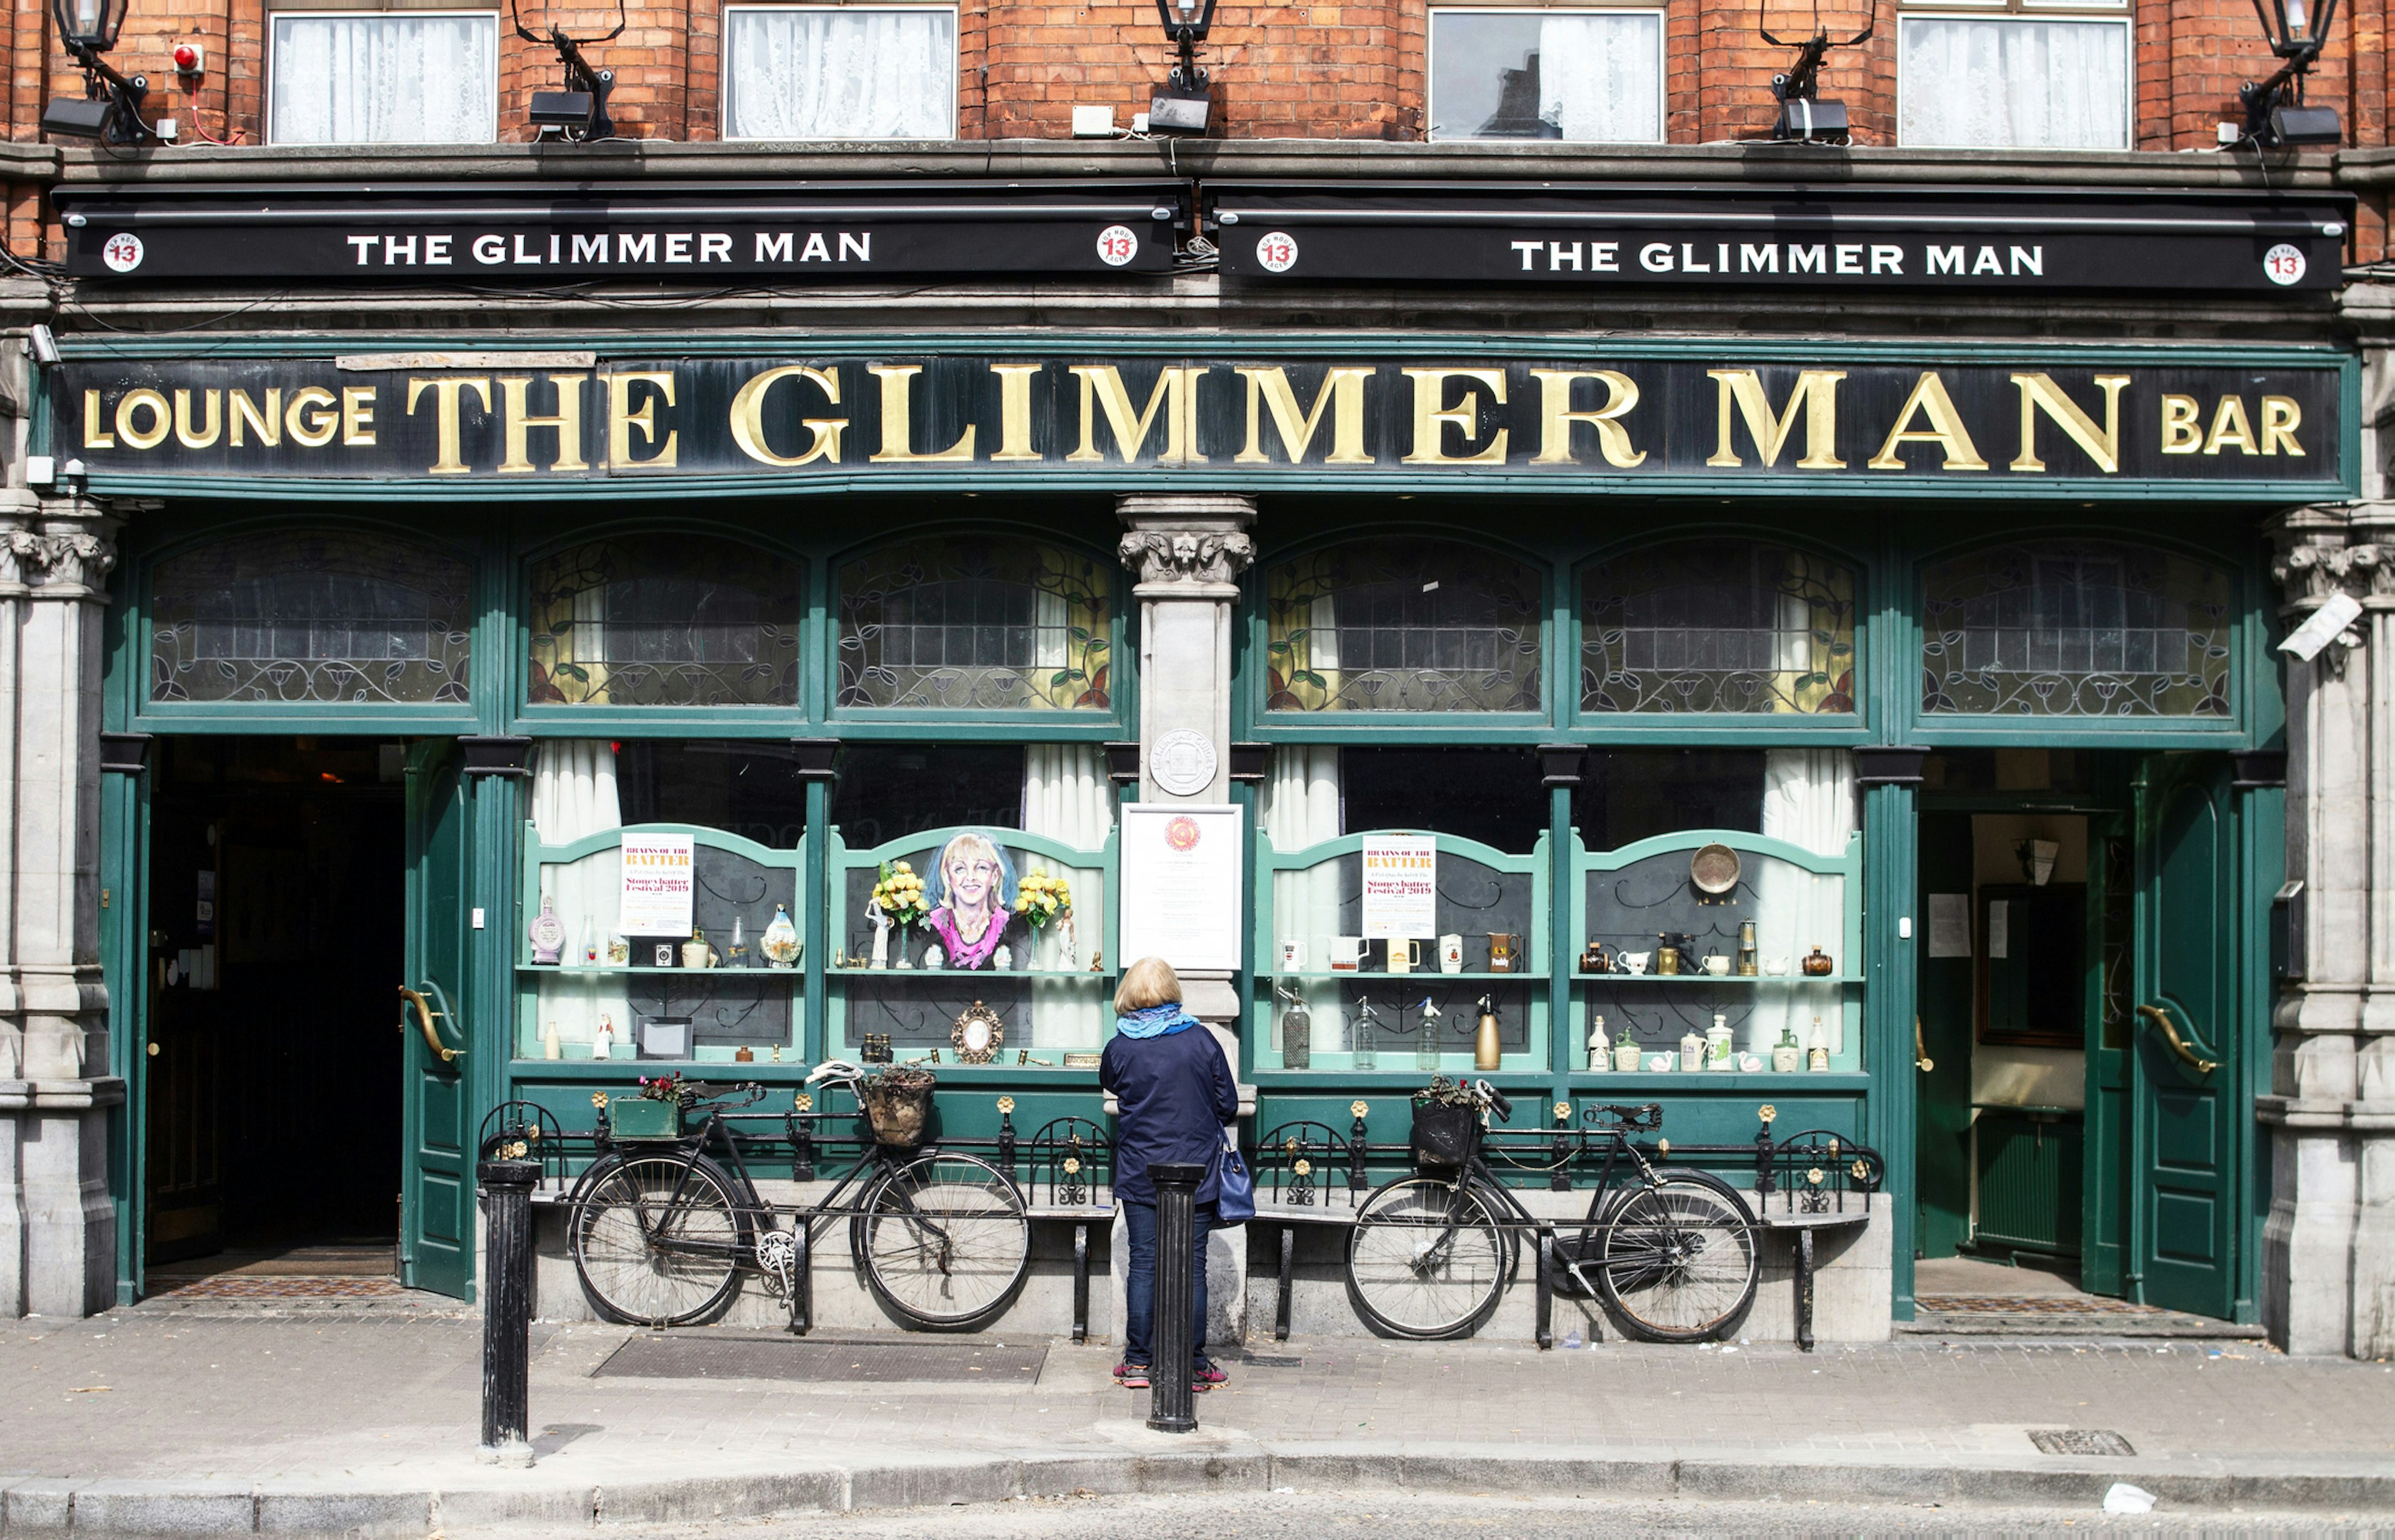 The Glimmer Man Pub in Stoneybatter,Dublin, Ireland the interior walls are covered in old photos, paintings,memorabilia and old drink company signage.